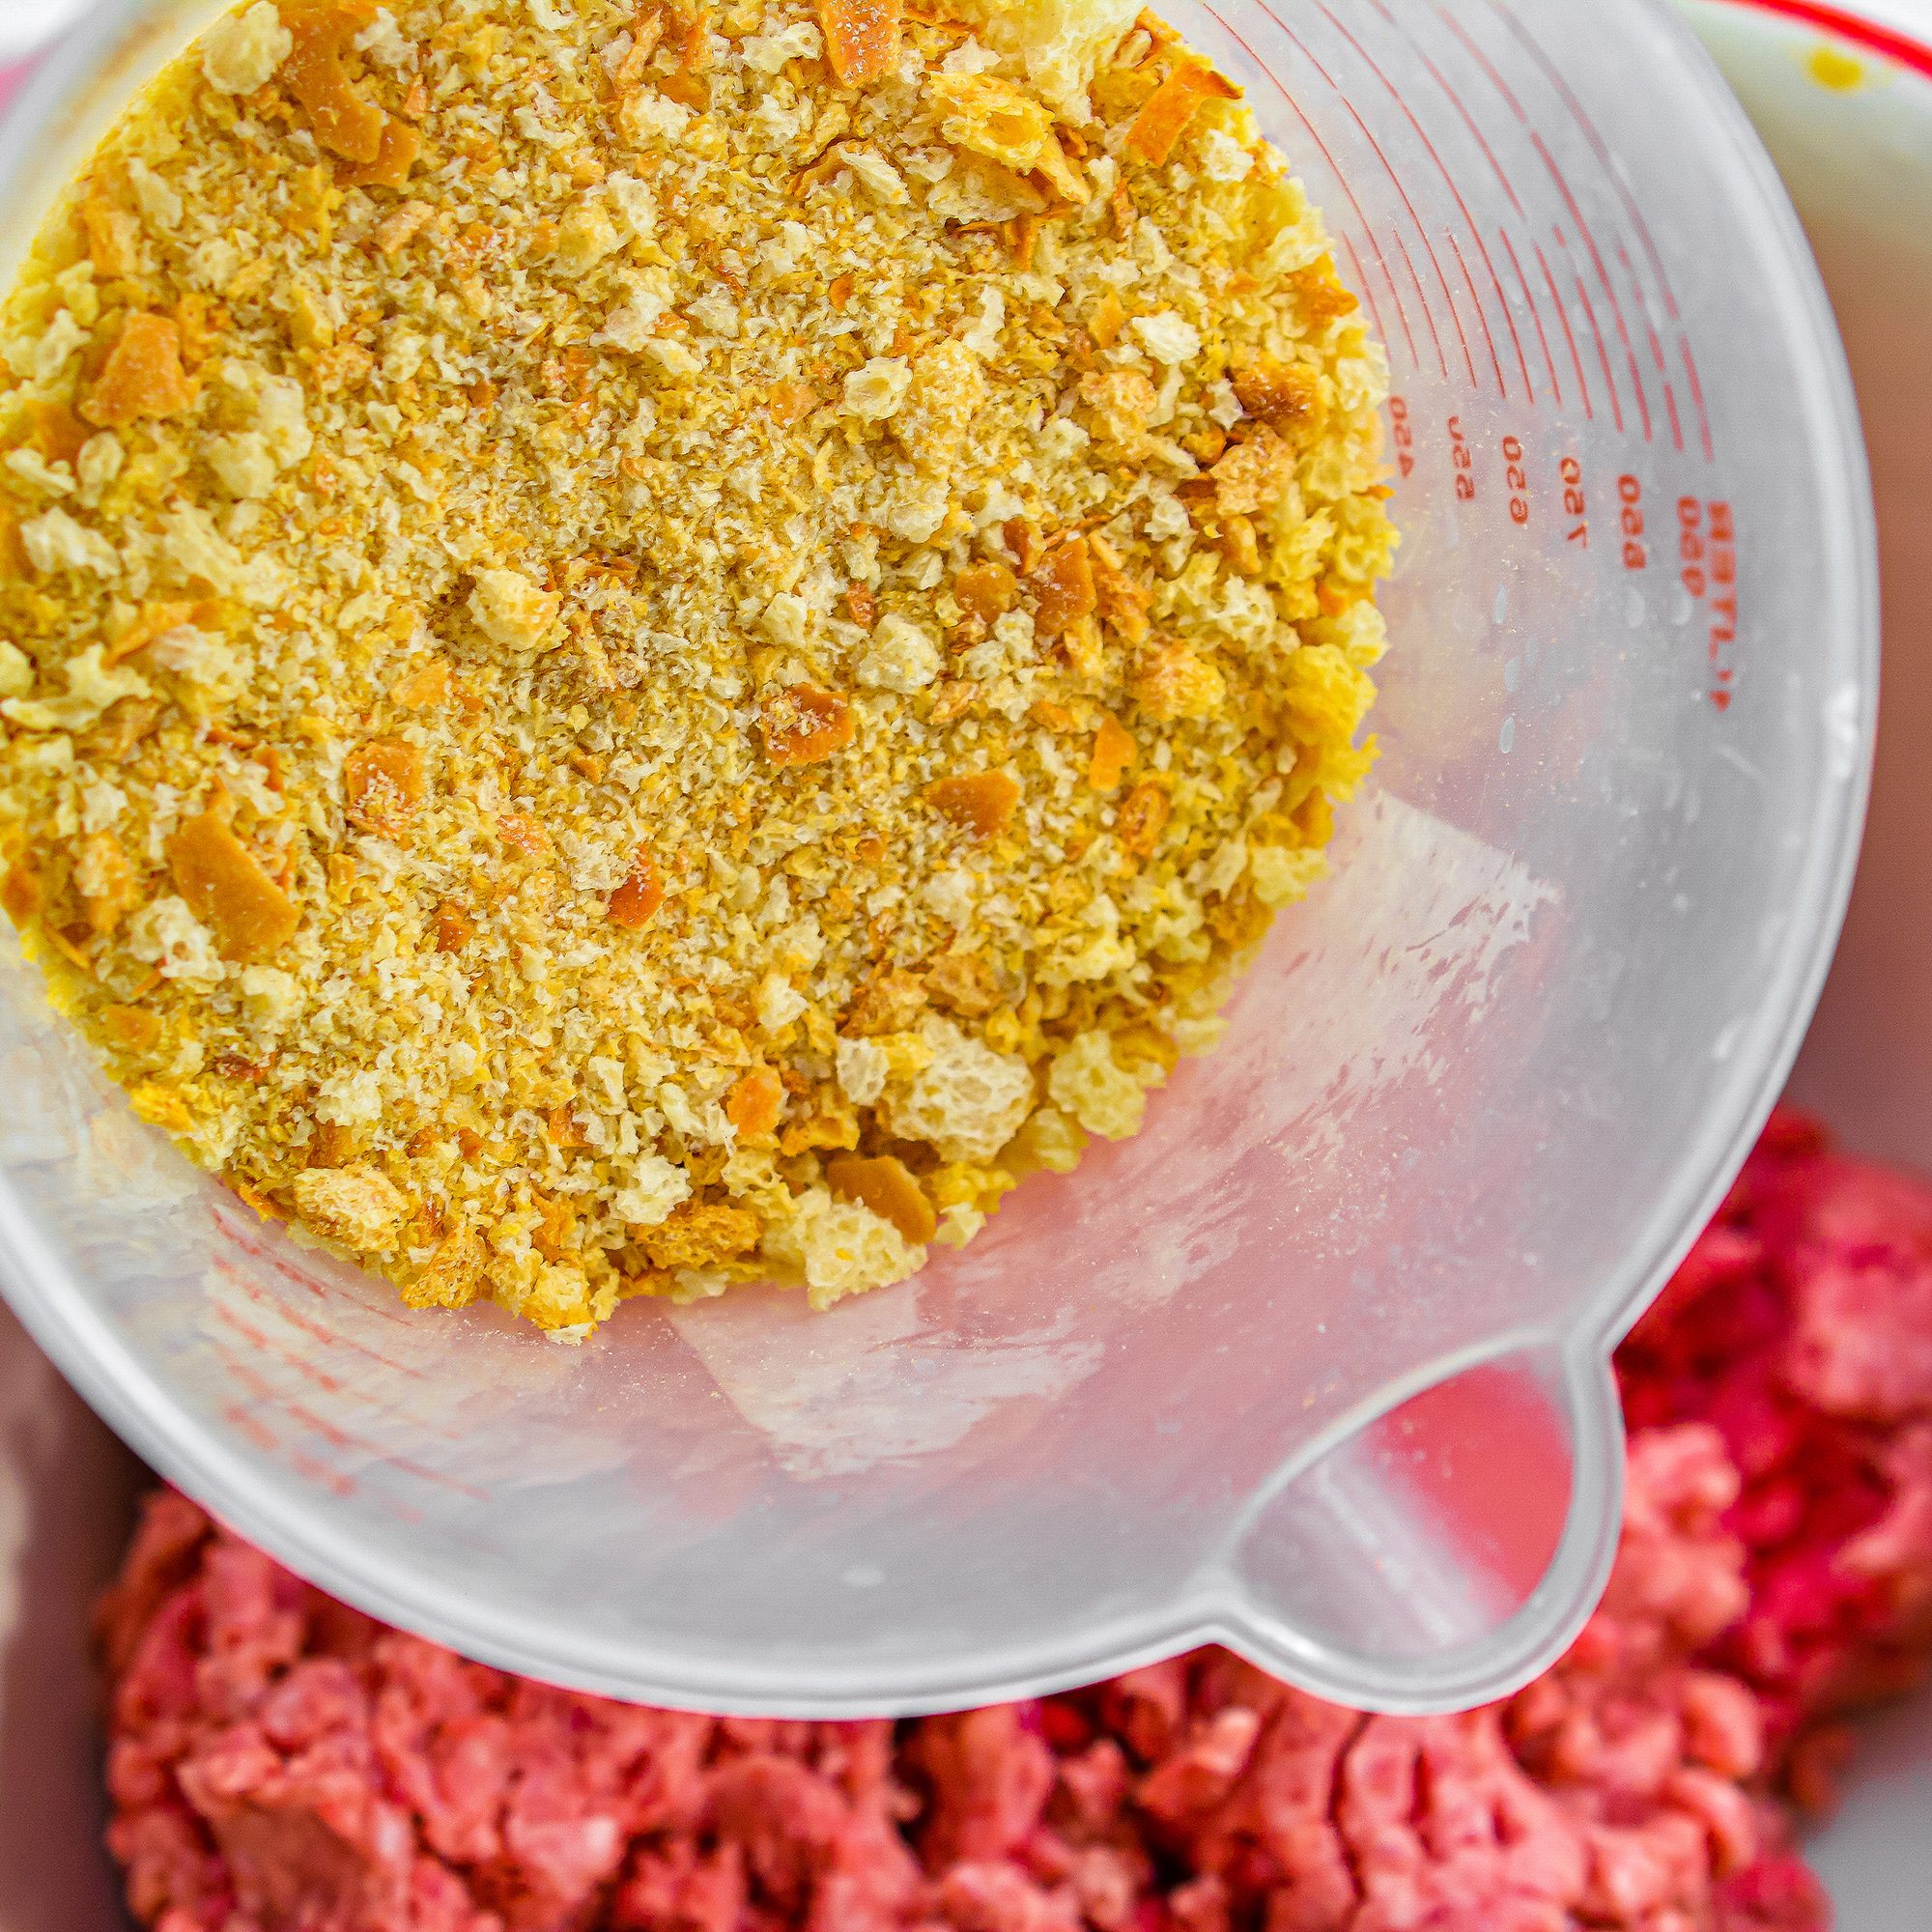 In a mixing bowl, combine the ground beef, ground pork, parmesan cheese, garlic, parsley, bread crumbs, eggs, and salt and pepper to taste.